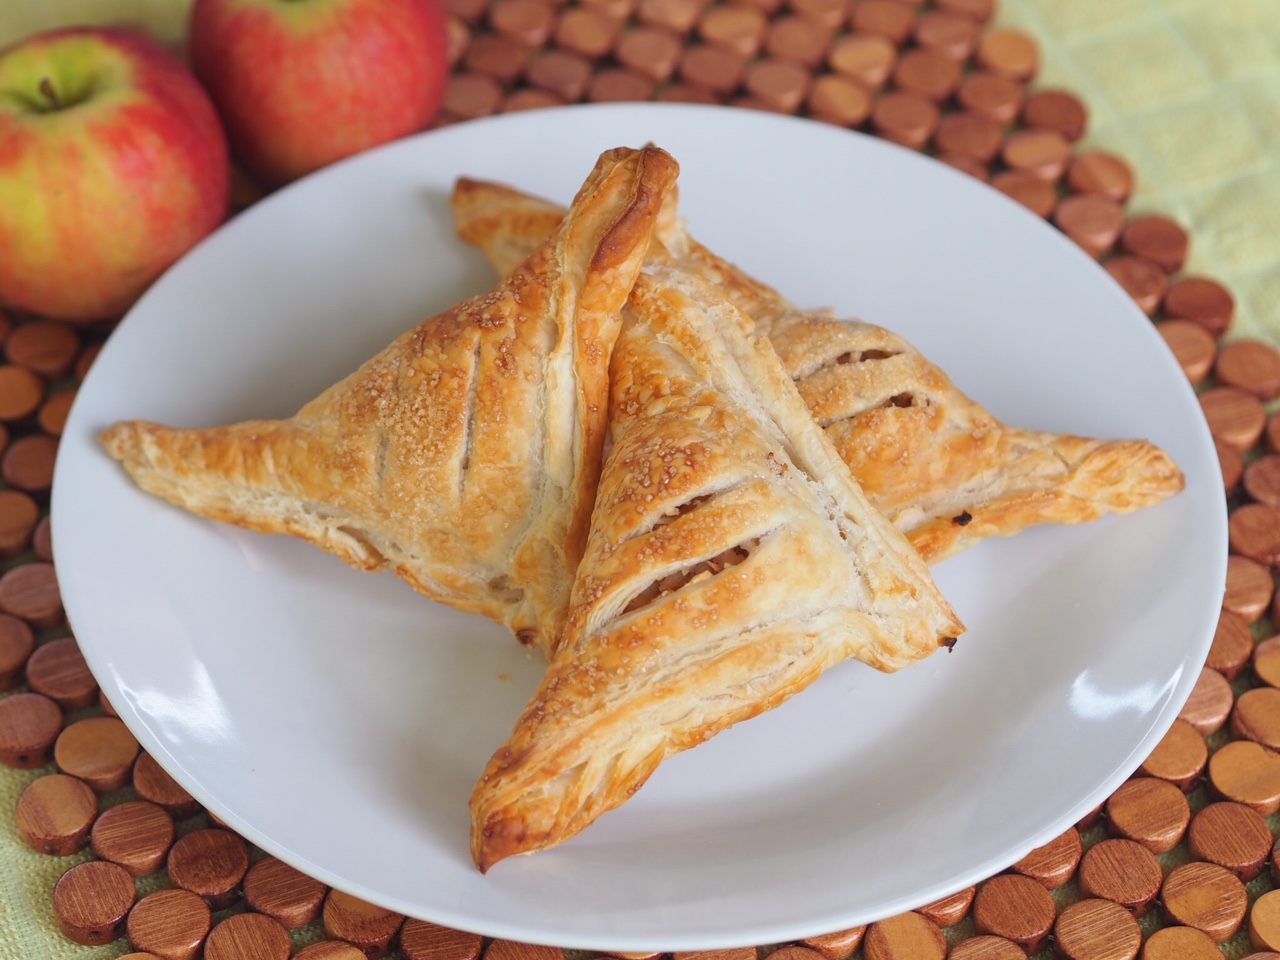 Apple and Cinnamon Pastry Triangles